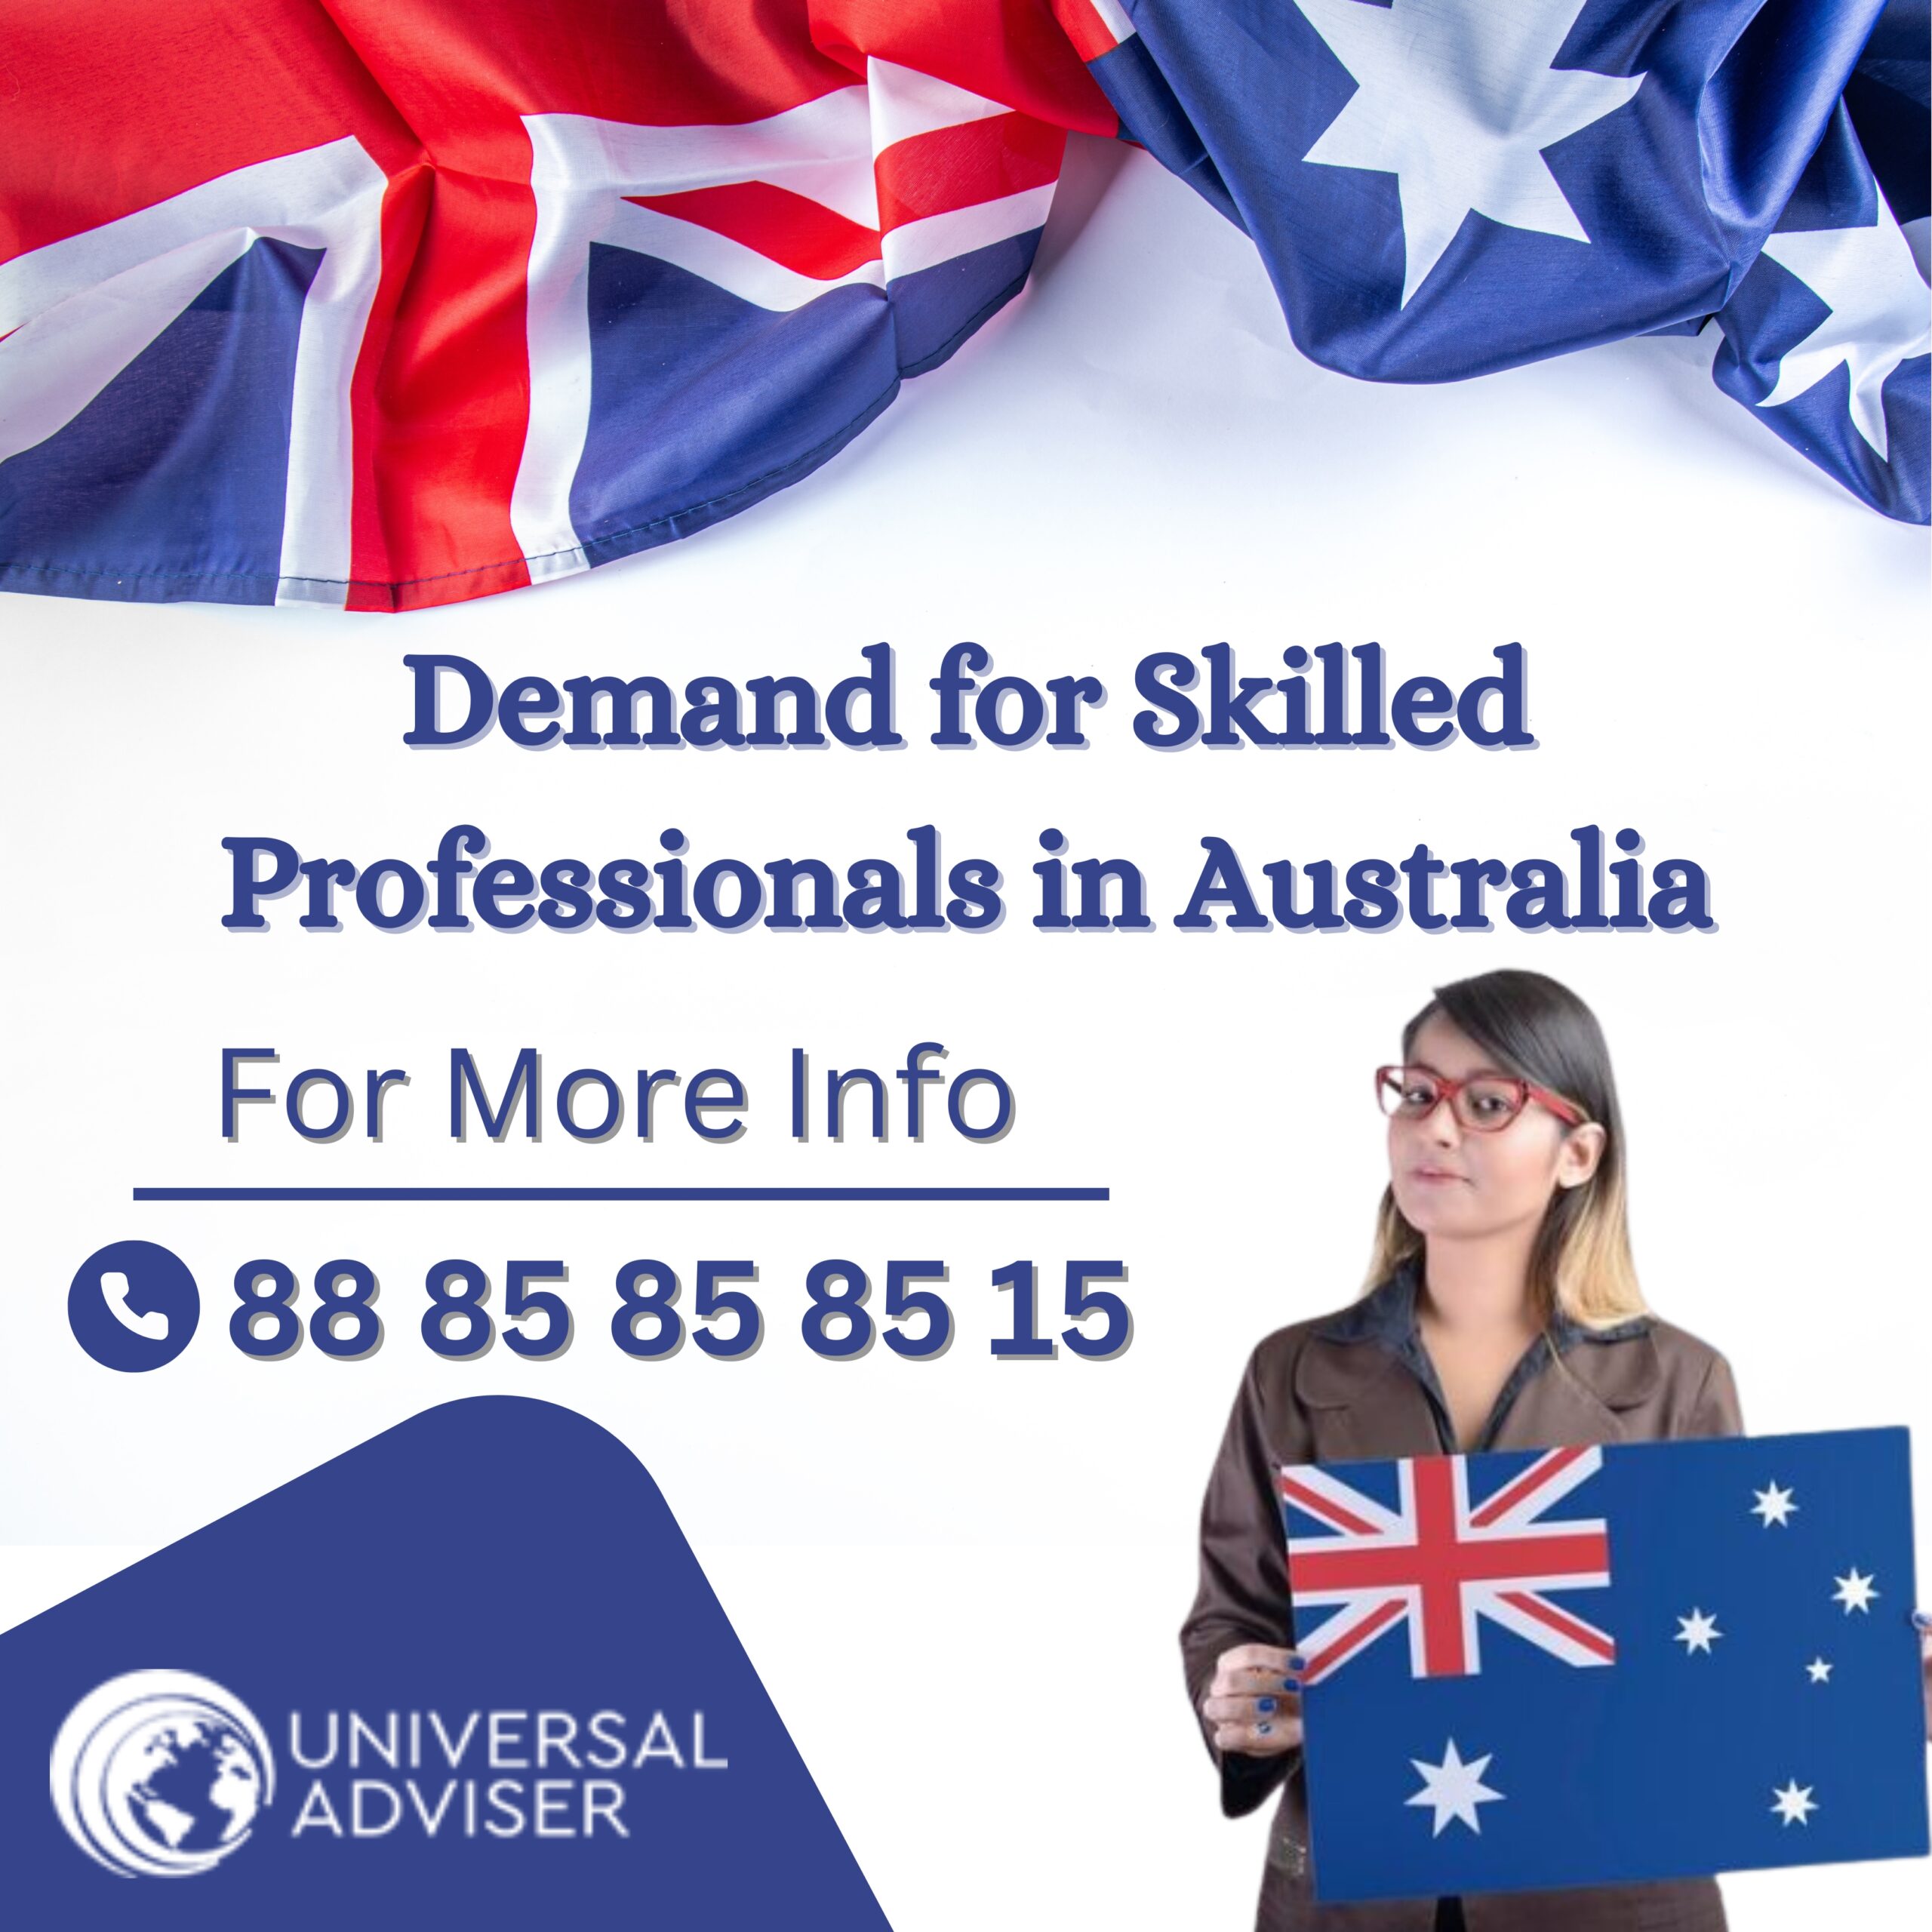 Demand for Skilled Professionals in Australia